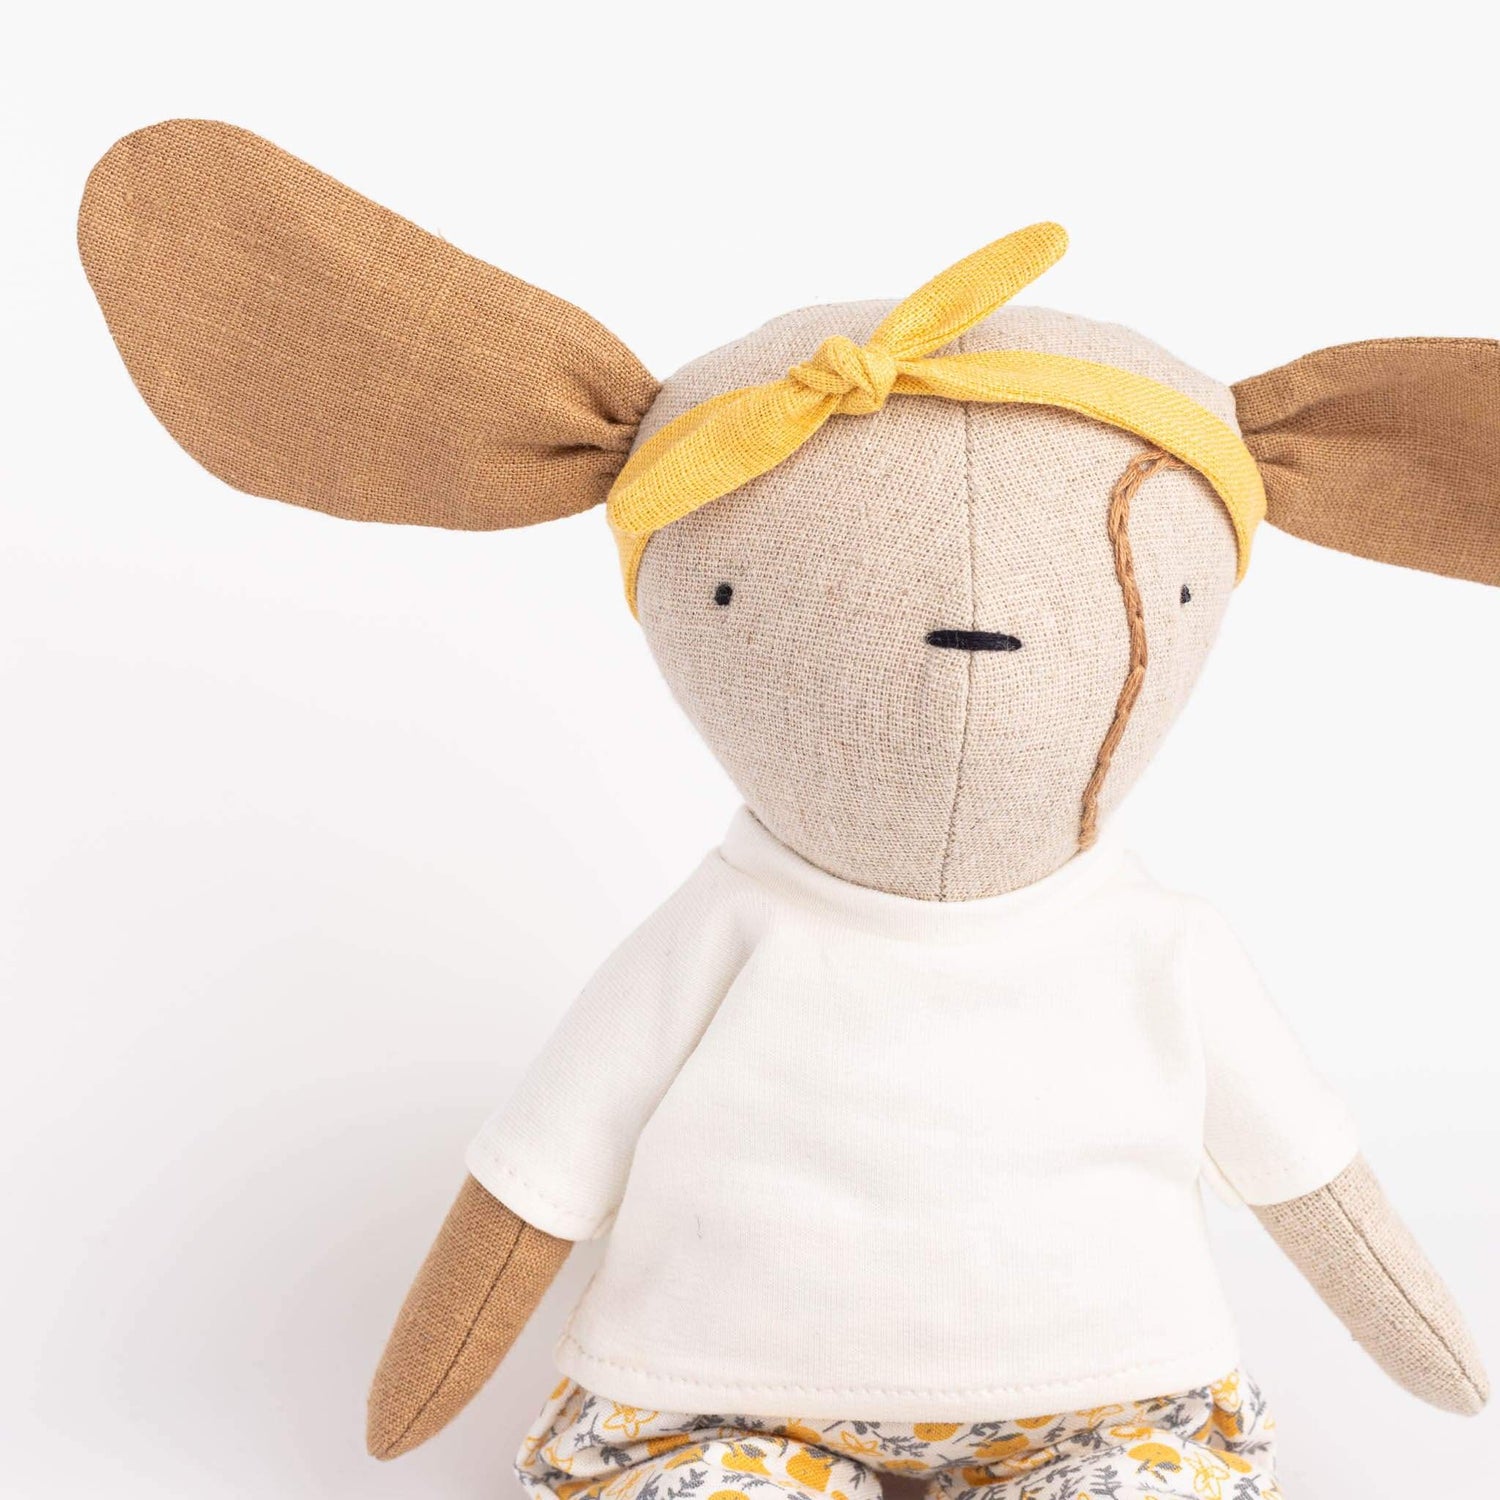 Cozymoss Soft Toys Dog Bloom - Handmade Soft Linen Toy Dog with Clothes Set